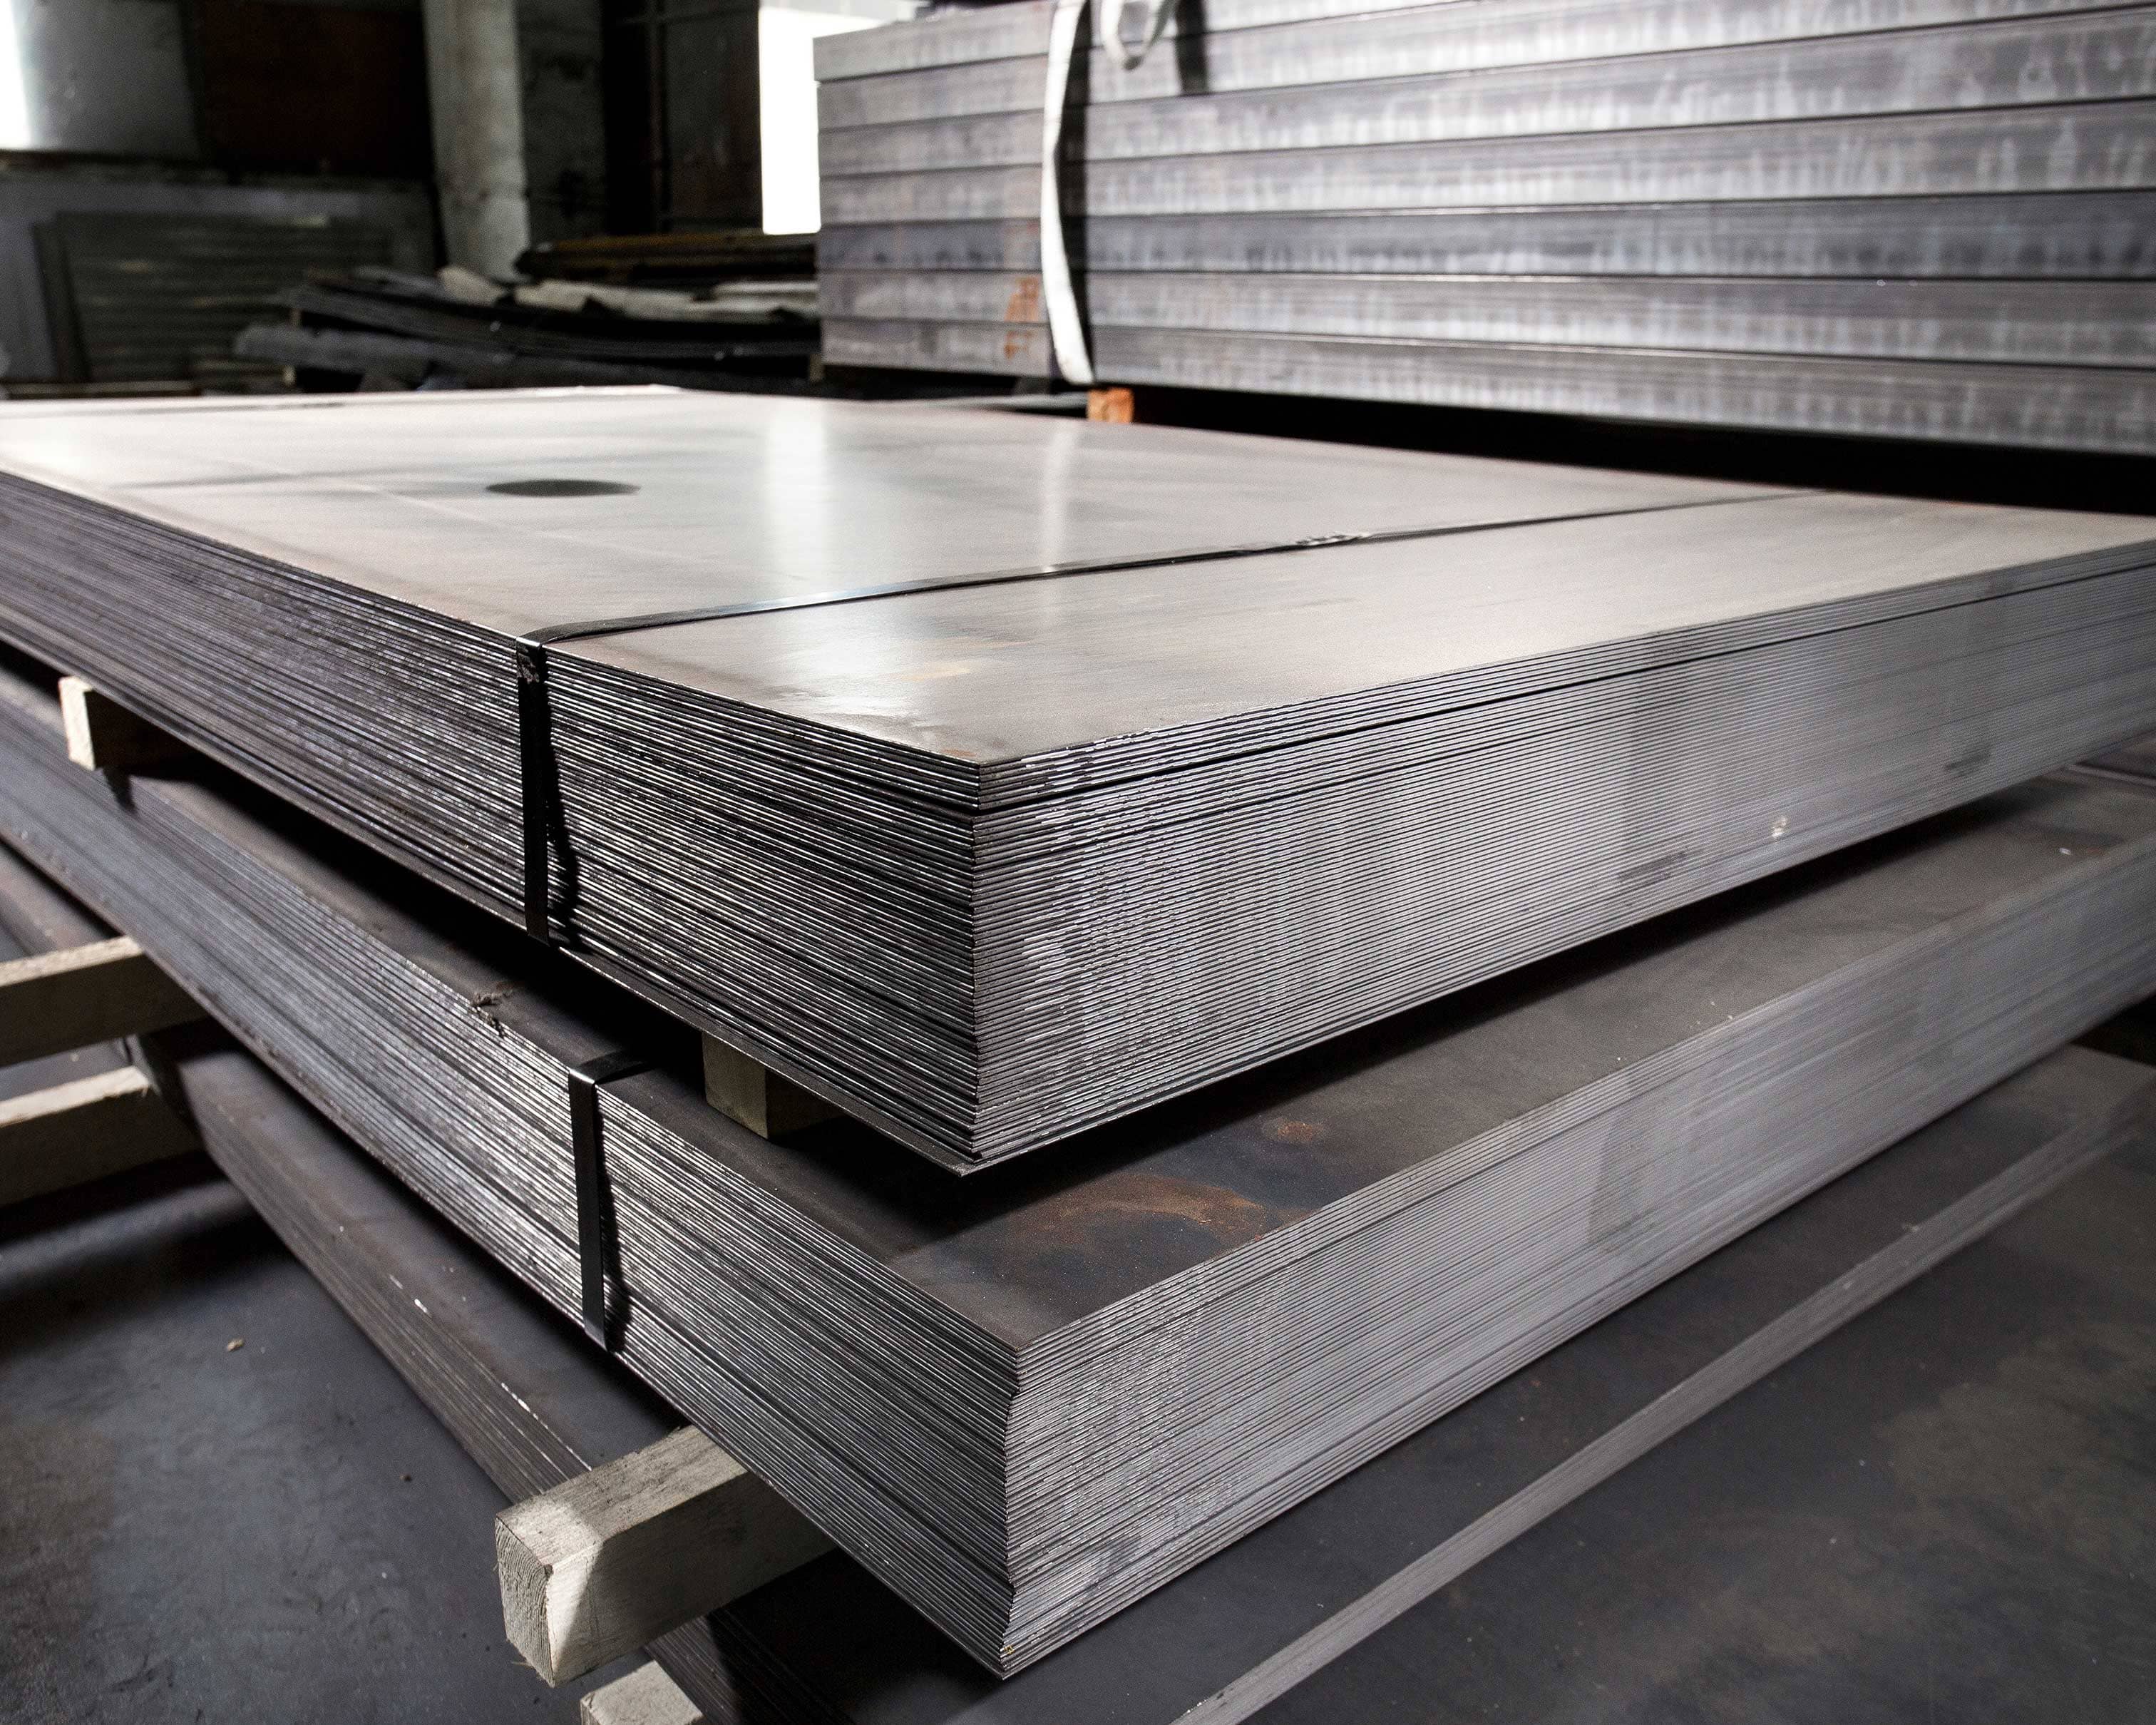 Carbon steel sheets